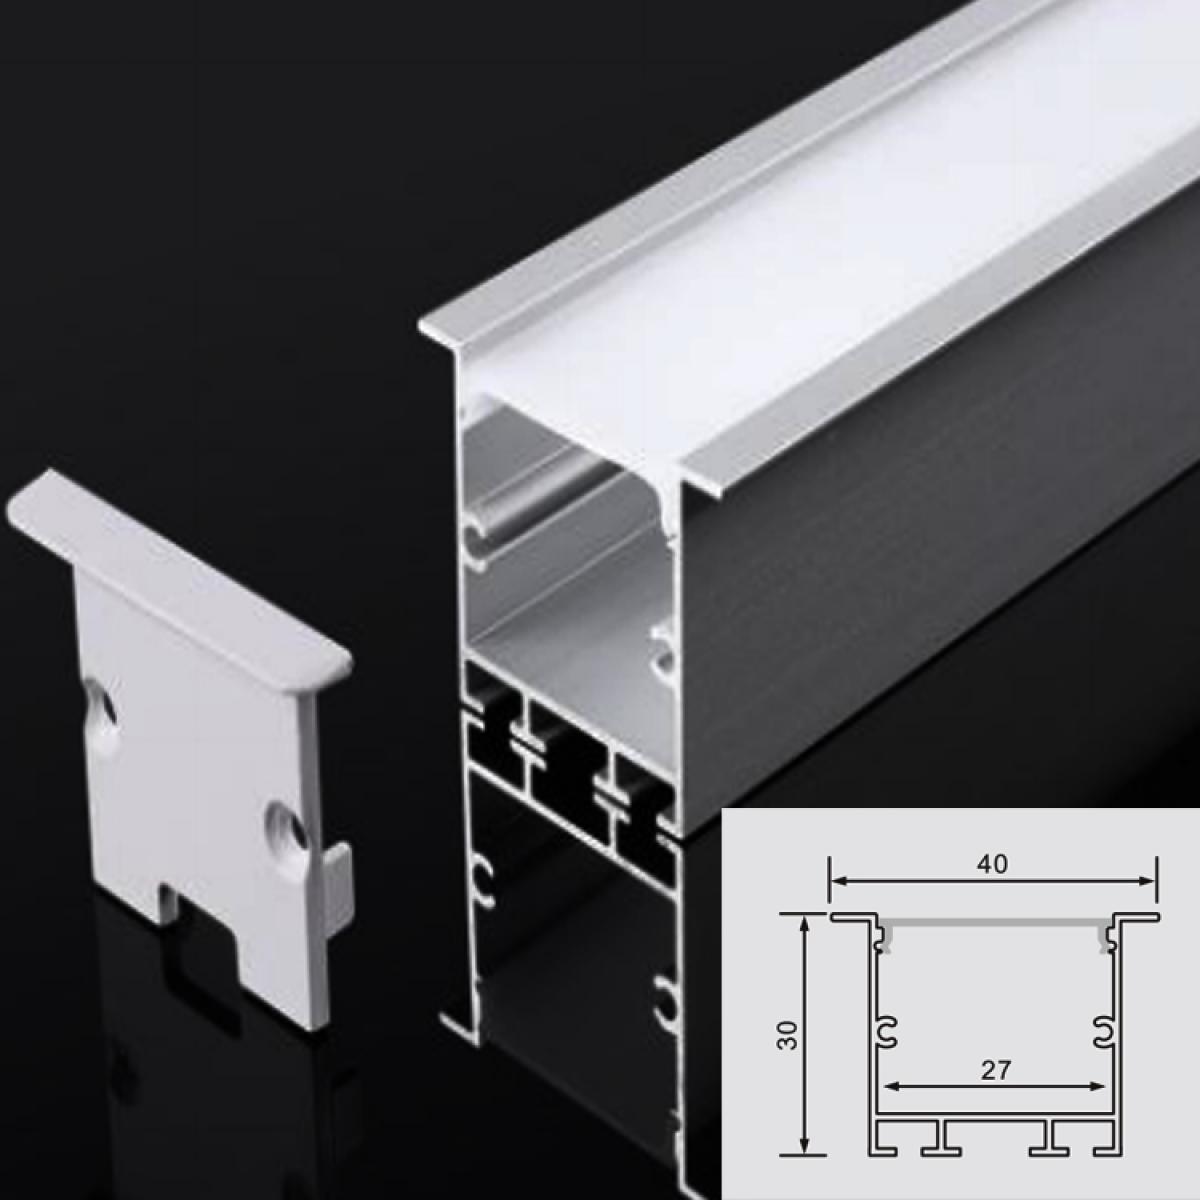 TXN-3030A LX40X30MM Good Quality Square Led Aluminium Profile Extrusion Channel With High Light PC Cover For Led Strip